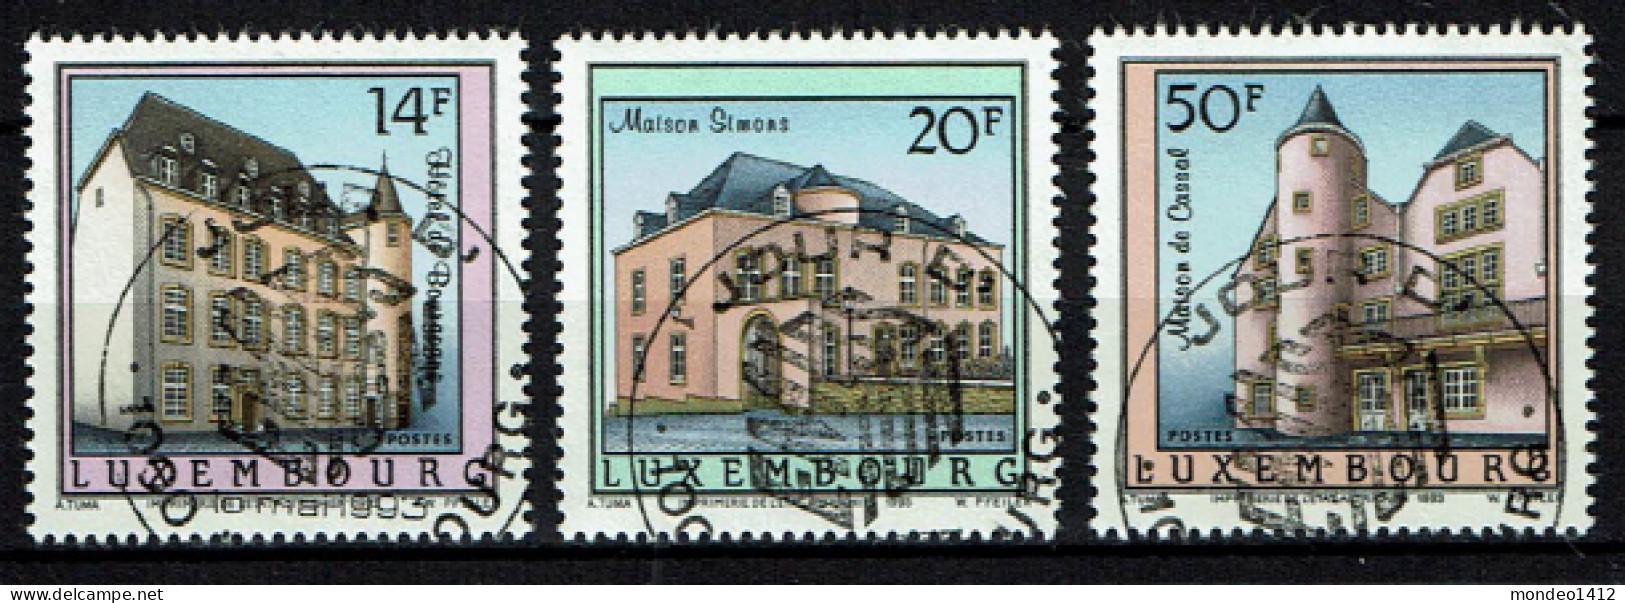 Luxembourg 1993 - YT 1270/1272 - Historic Residences, Demeures Seigneuriales Et Bourgeoises - Gebraucht